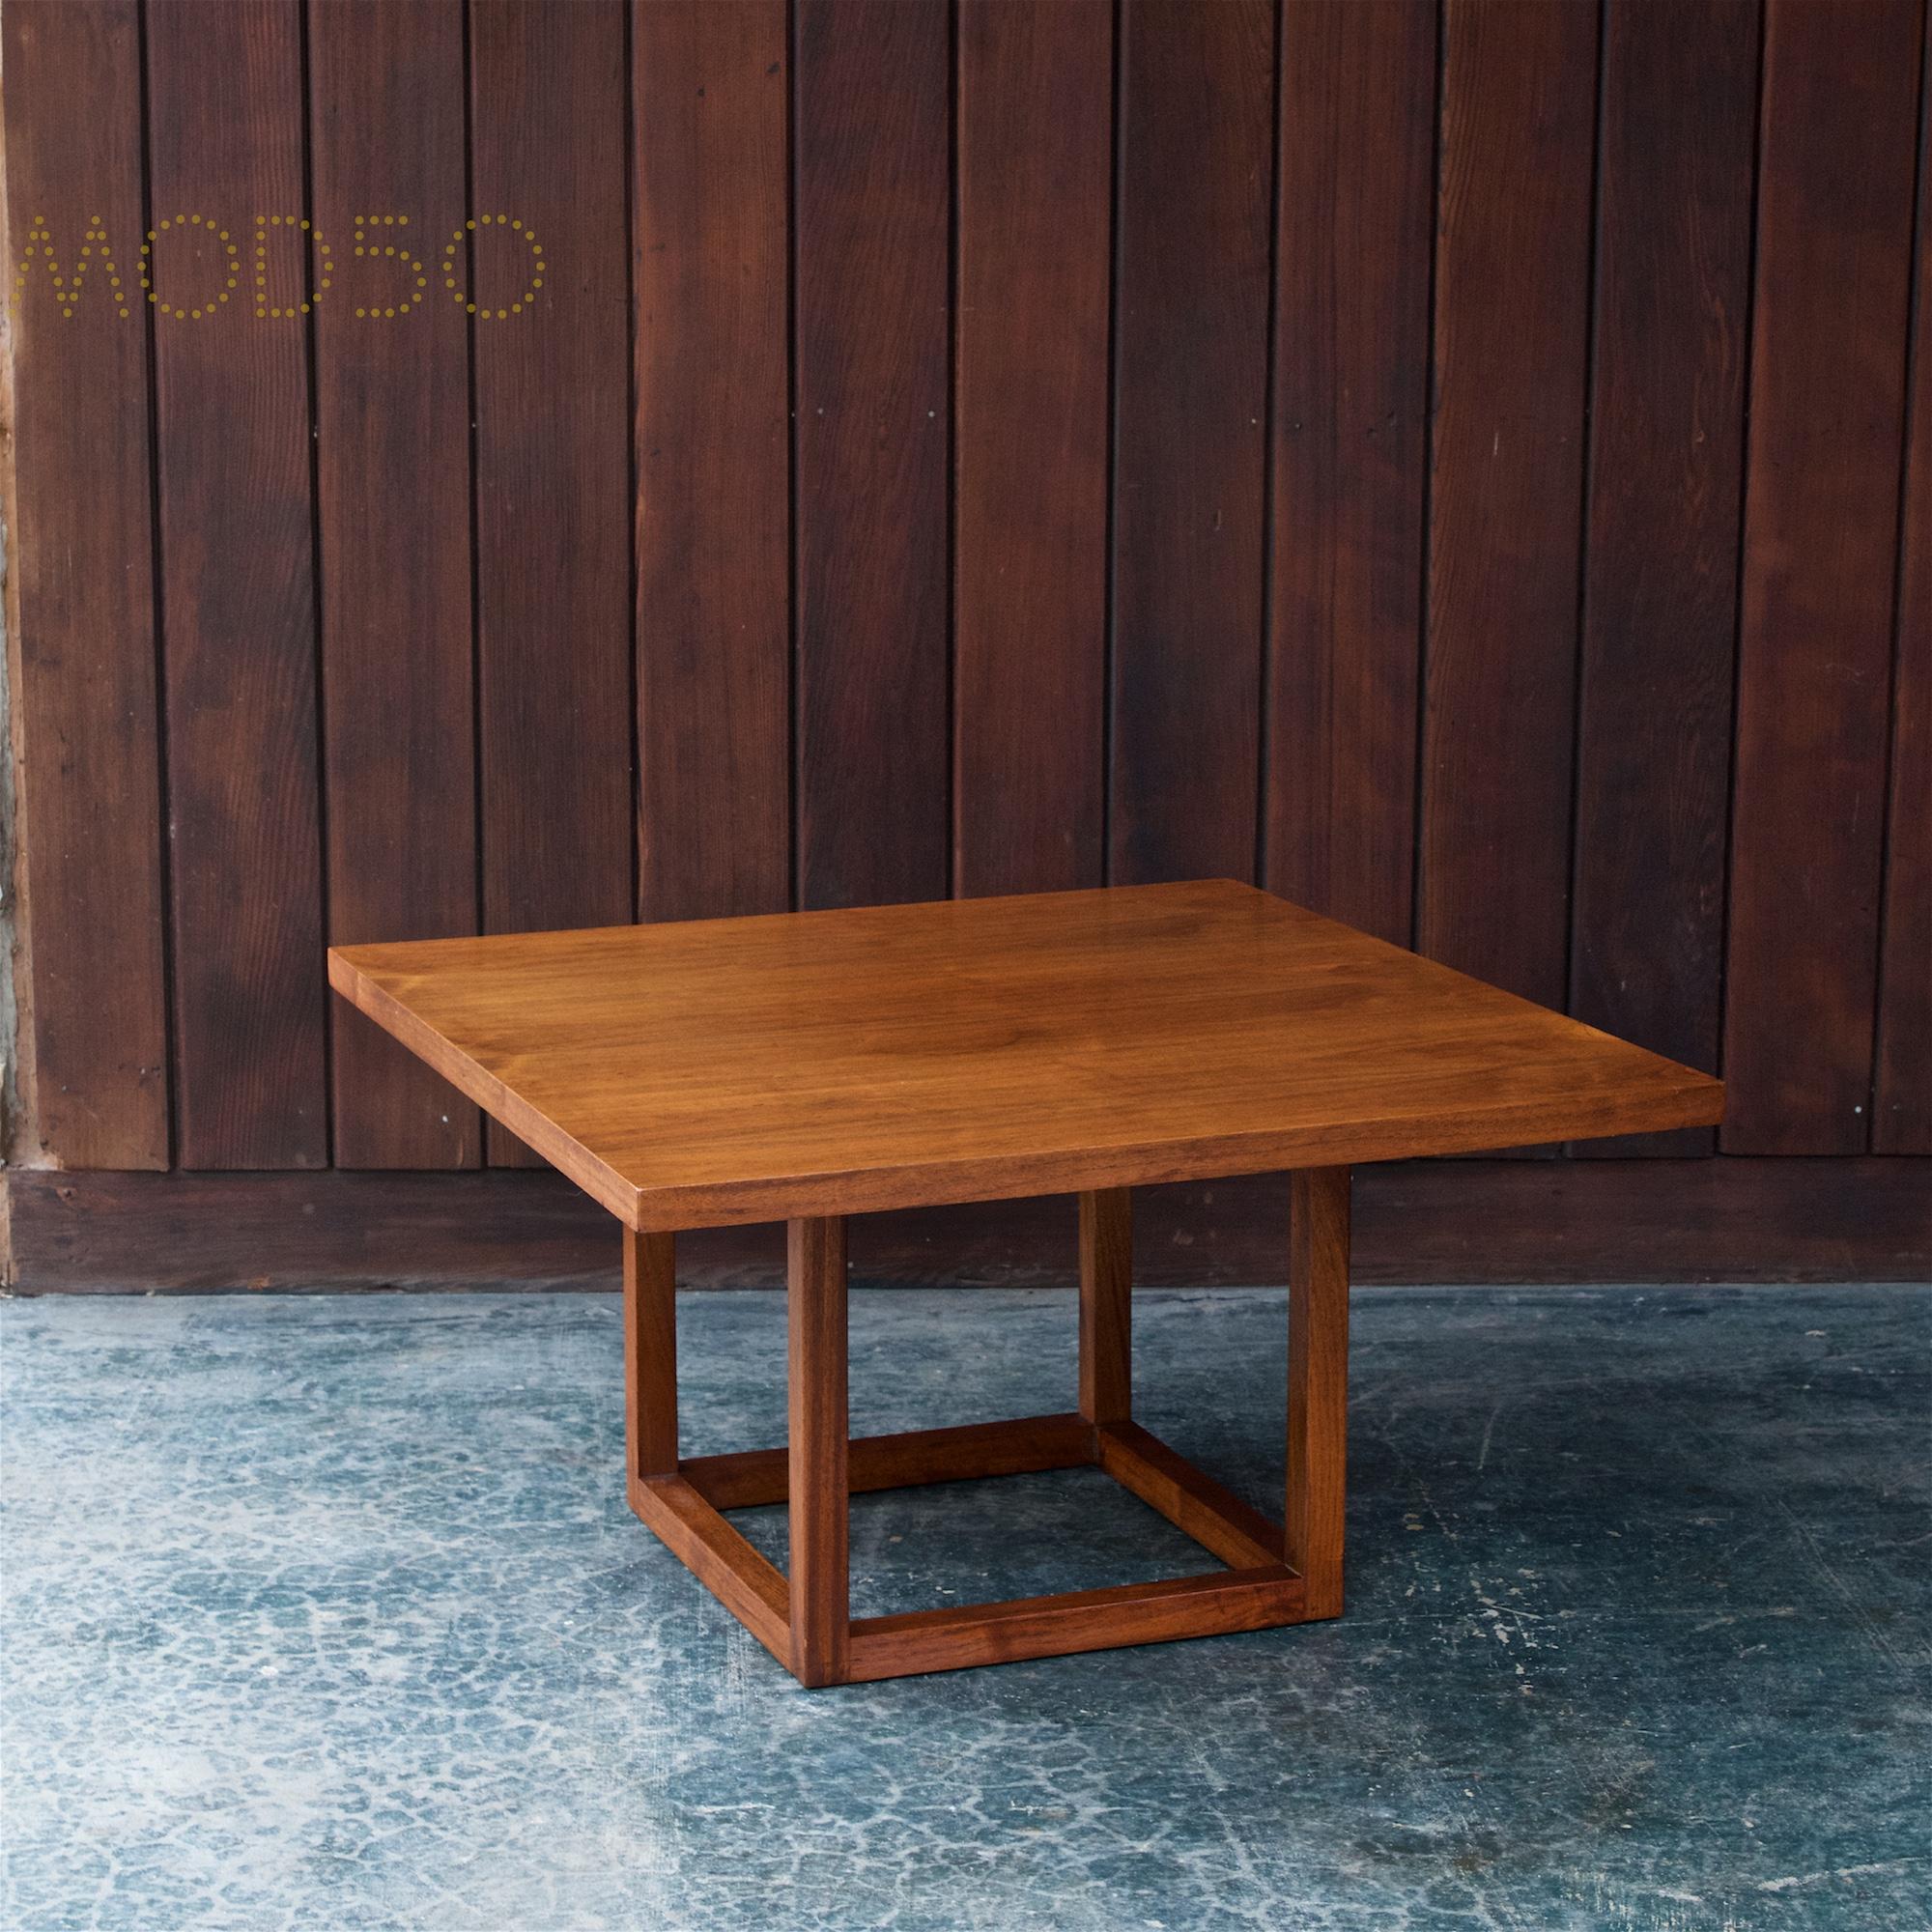 1960s Deep Hued Walnut Cube Coffee Table American Cabin Modern KNOLL Martz In Fair Condition For Sale In Hyattsville, MD